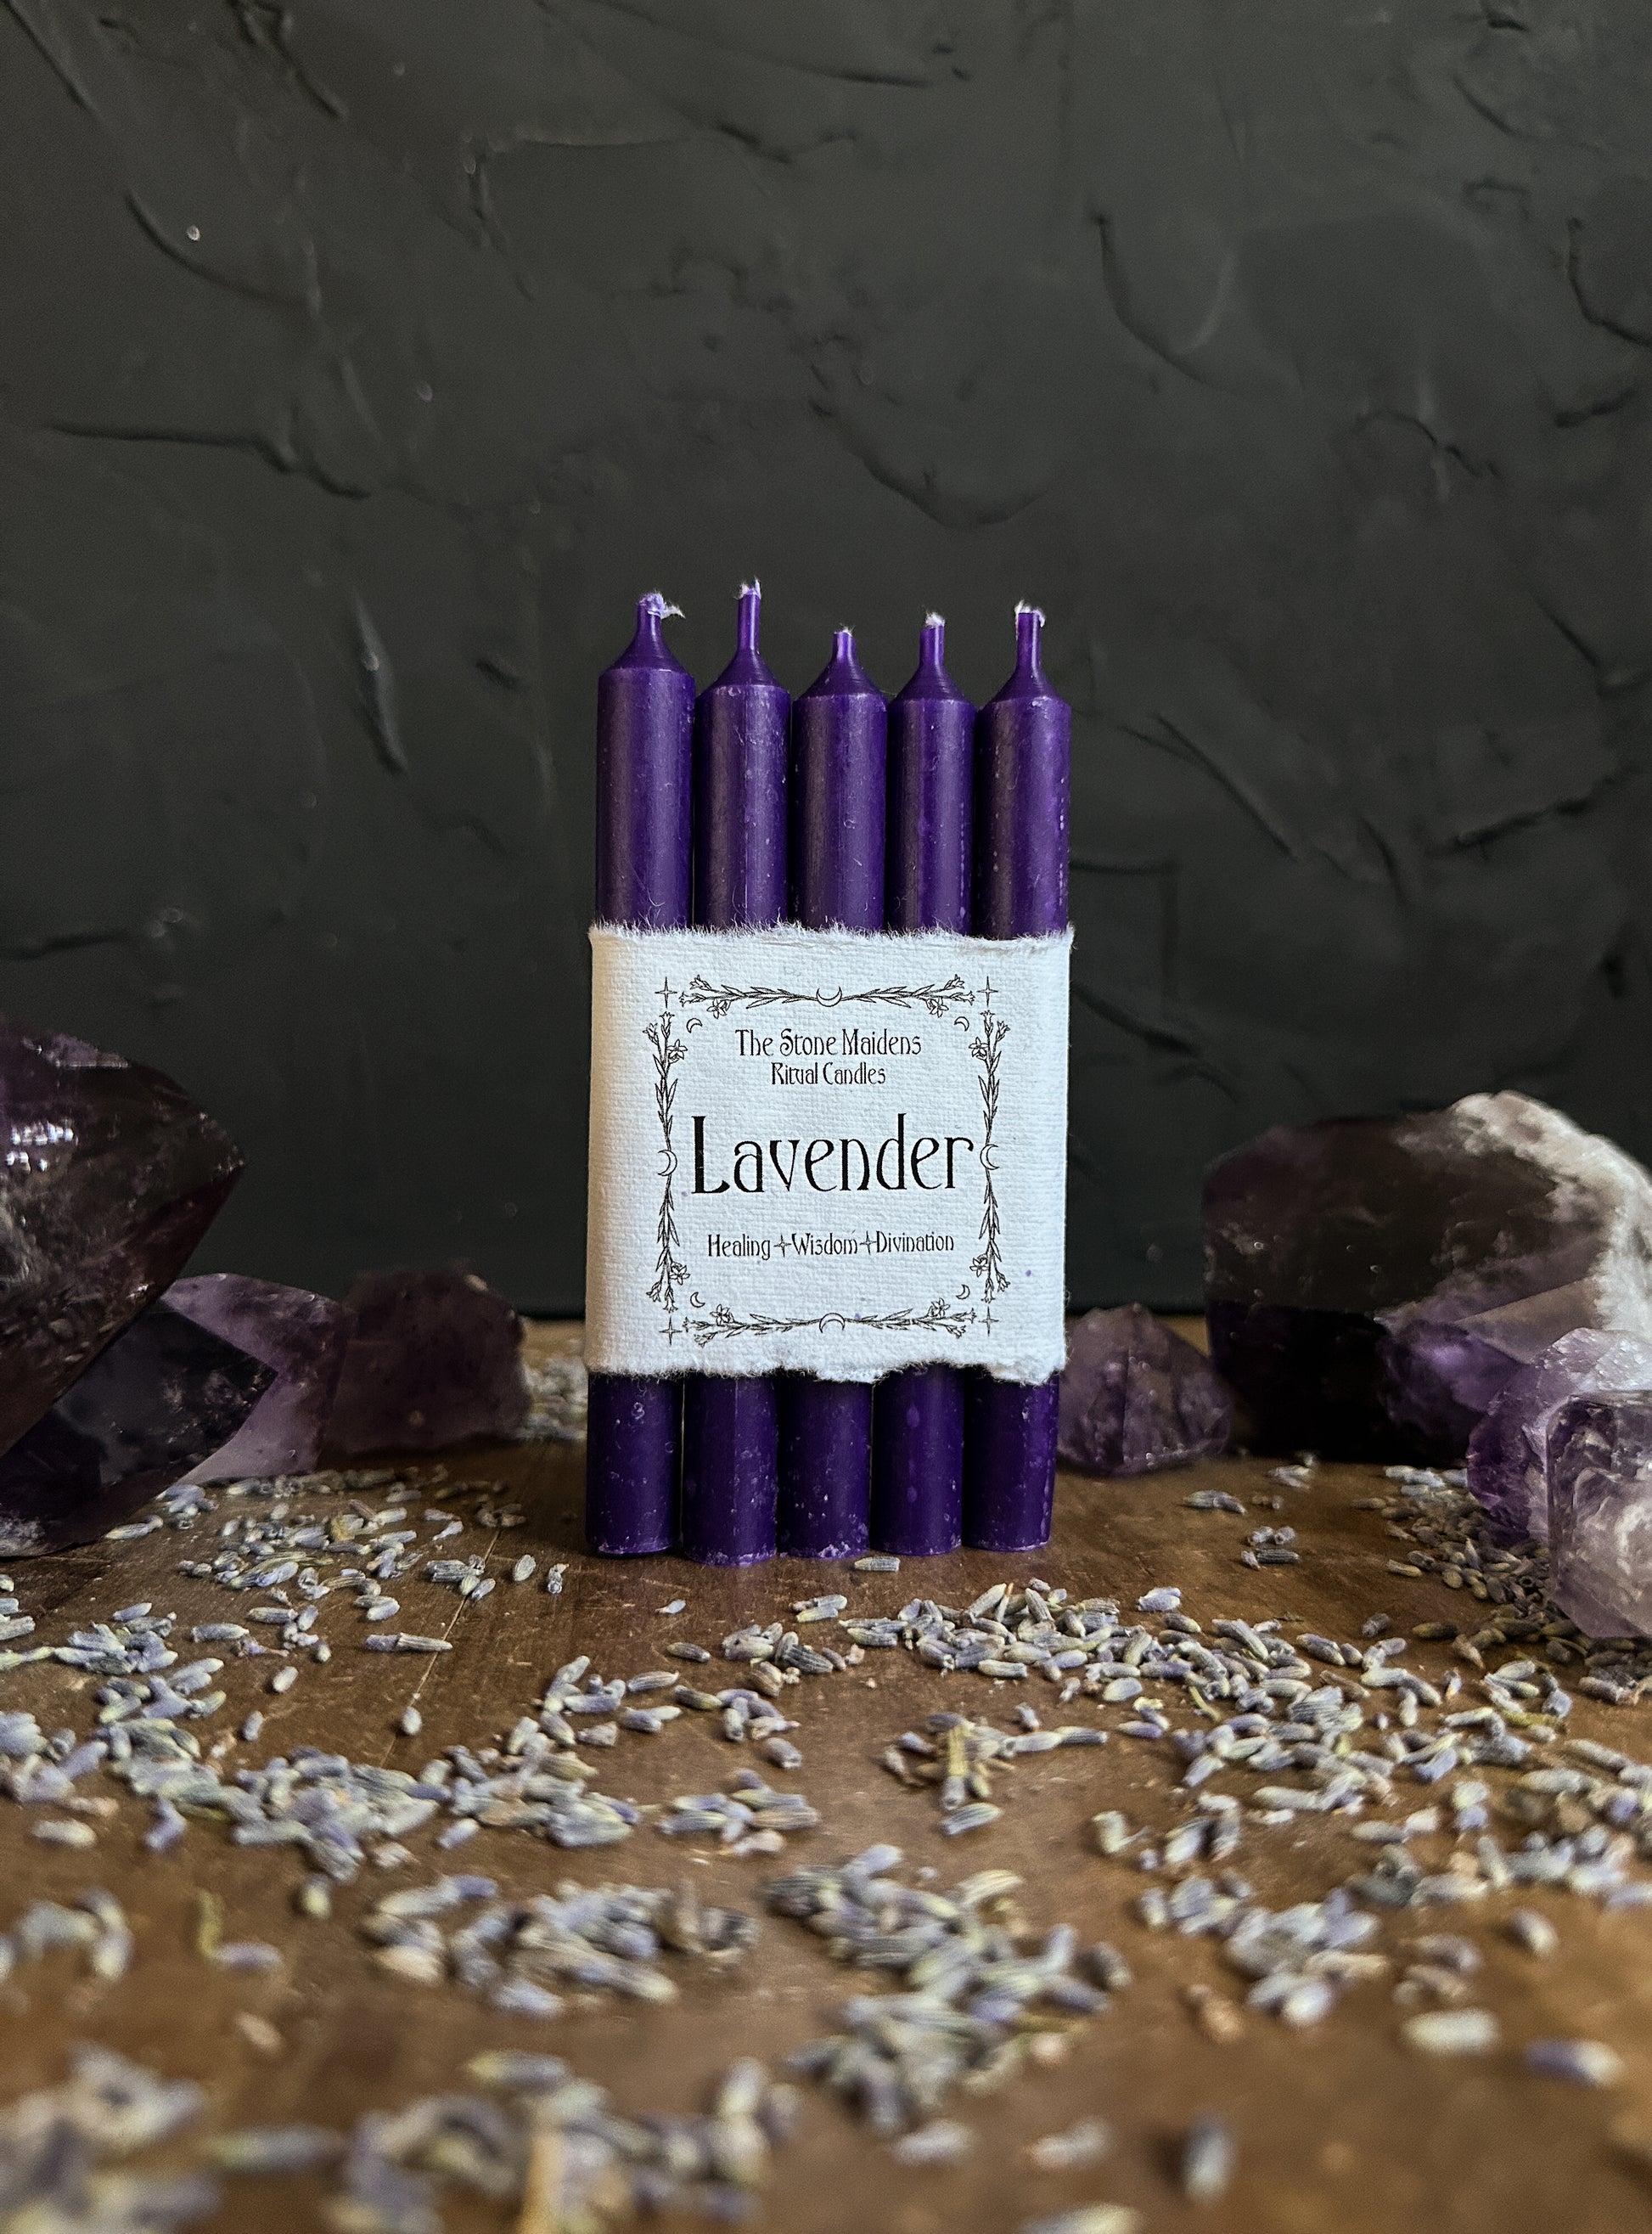 These Purple Ritual Candles also known as Chime Candles, are infused with the calming scent of Lavender essential oil.